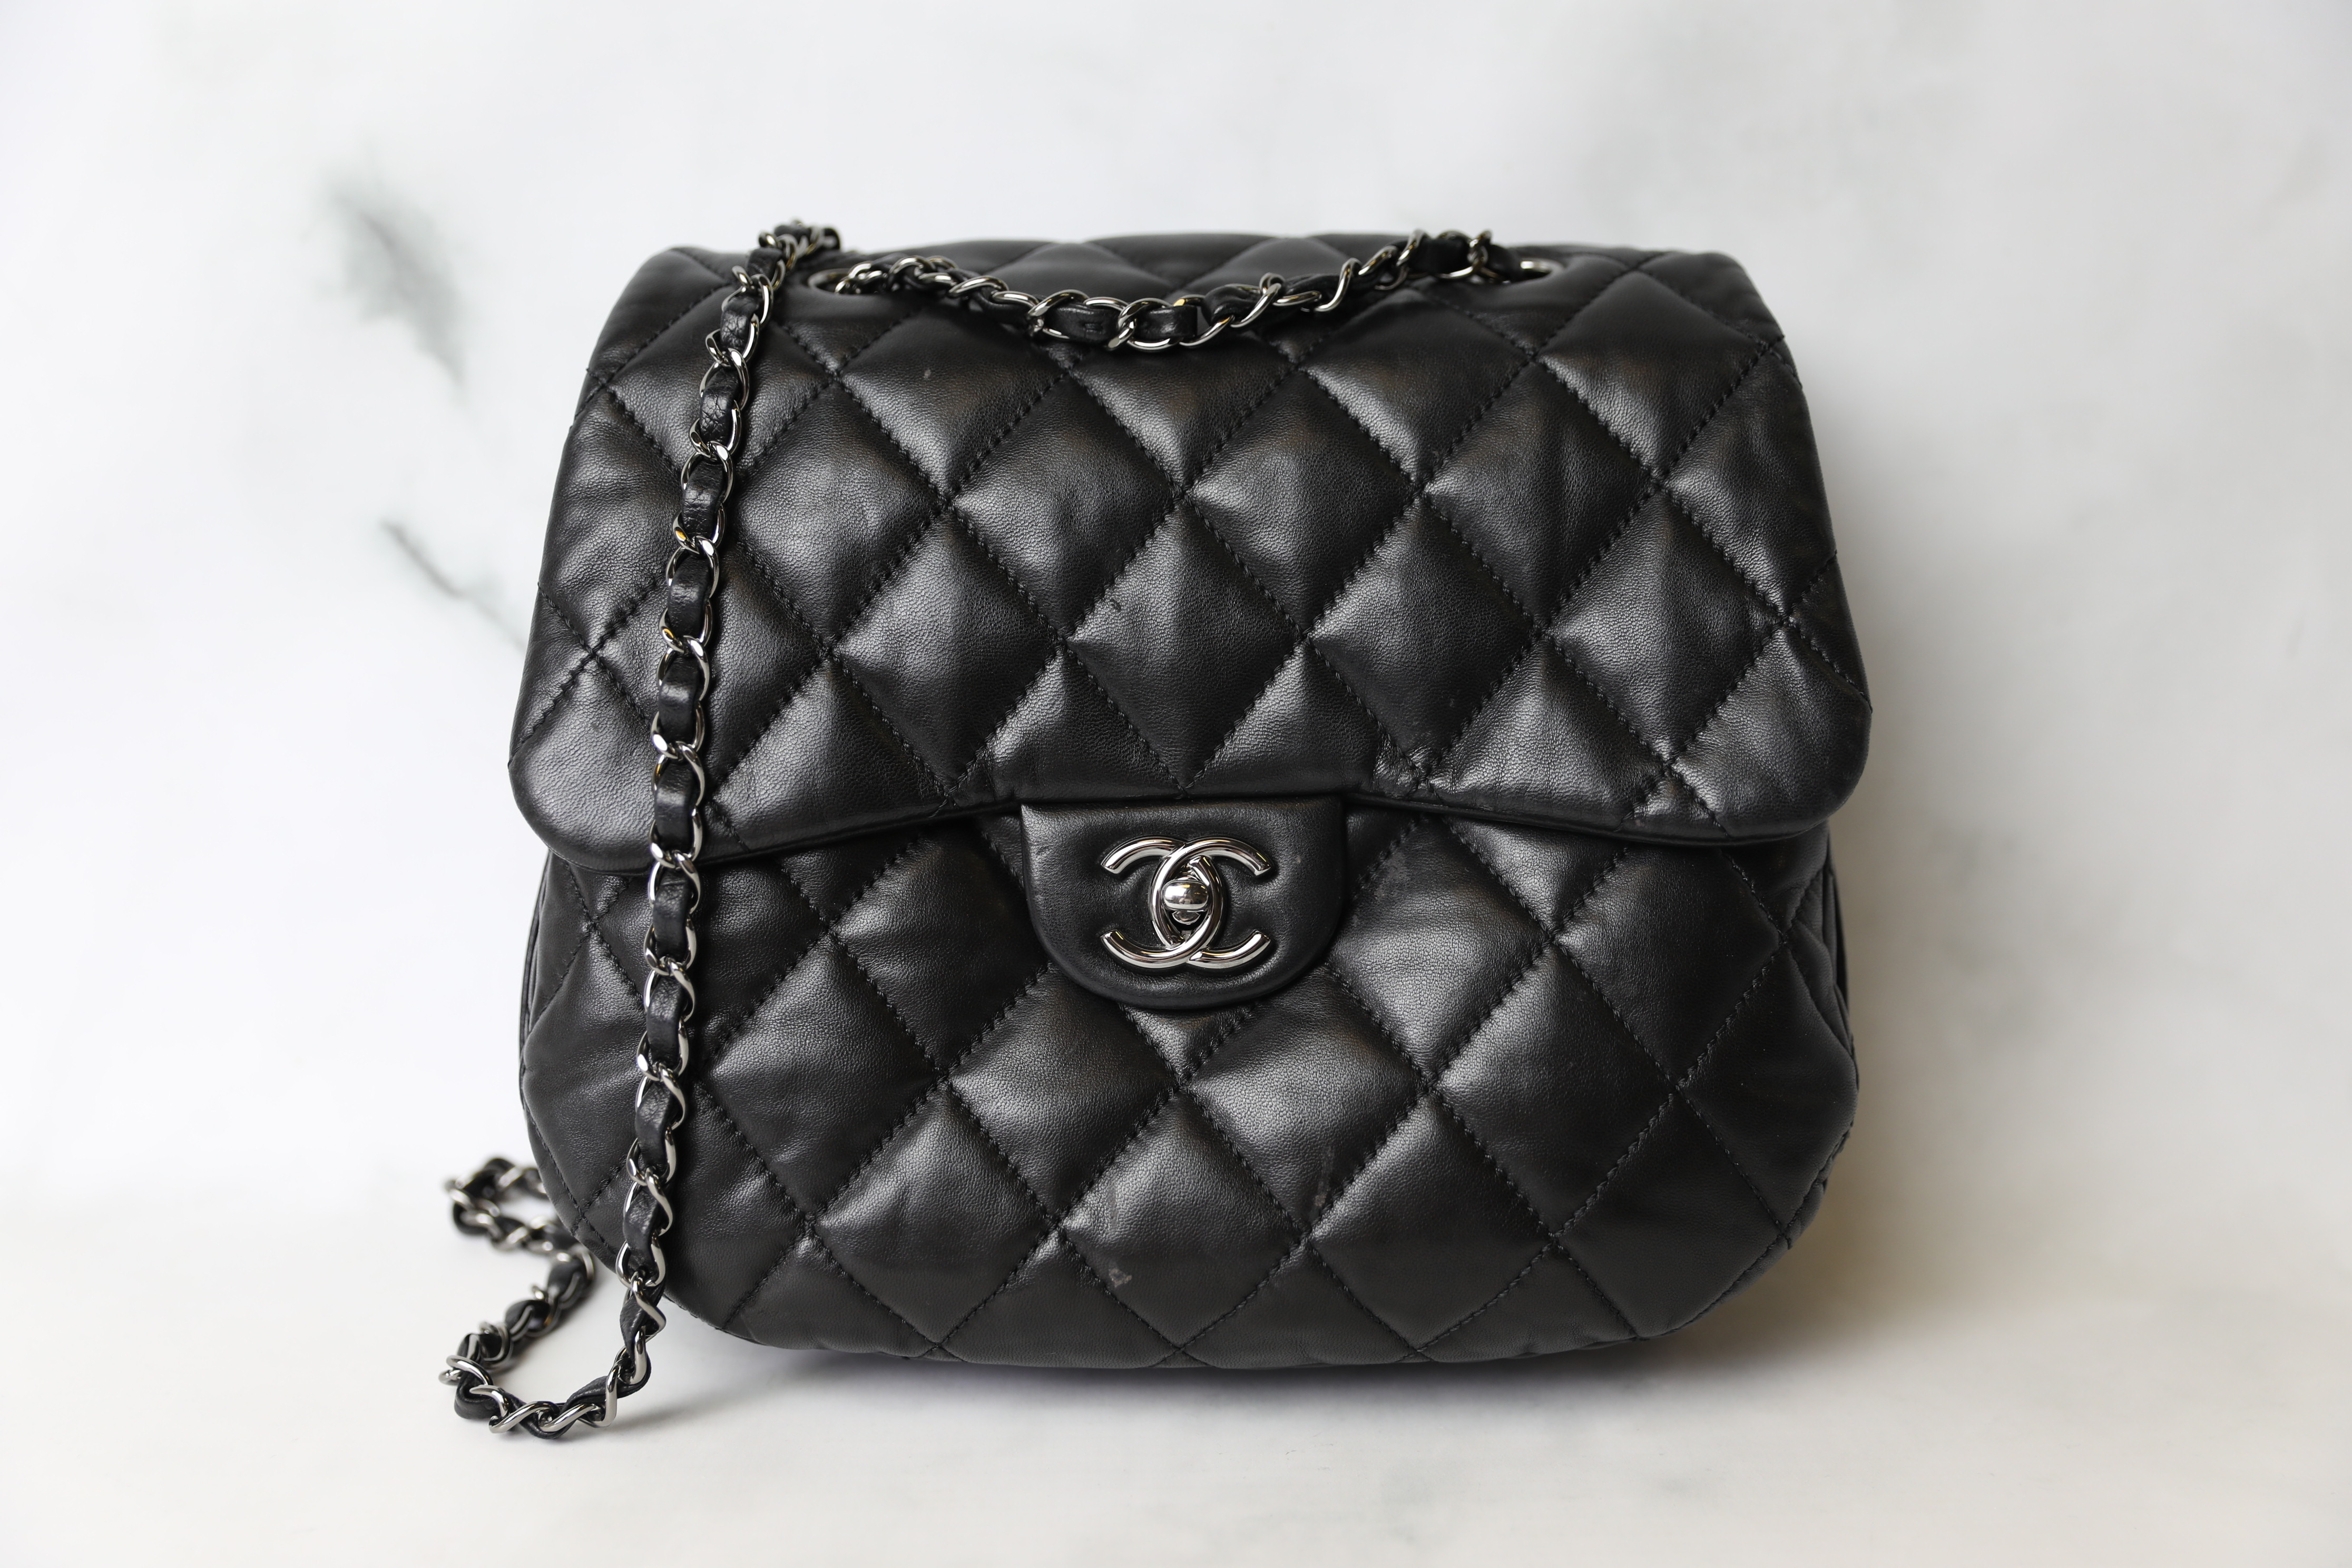 Chanel Quilted Saddle Bag, Black Calfskin with Silver Hardware, Preowned in  Box WA001 - Julia Rose Boston